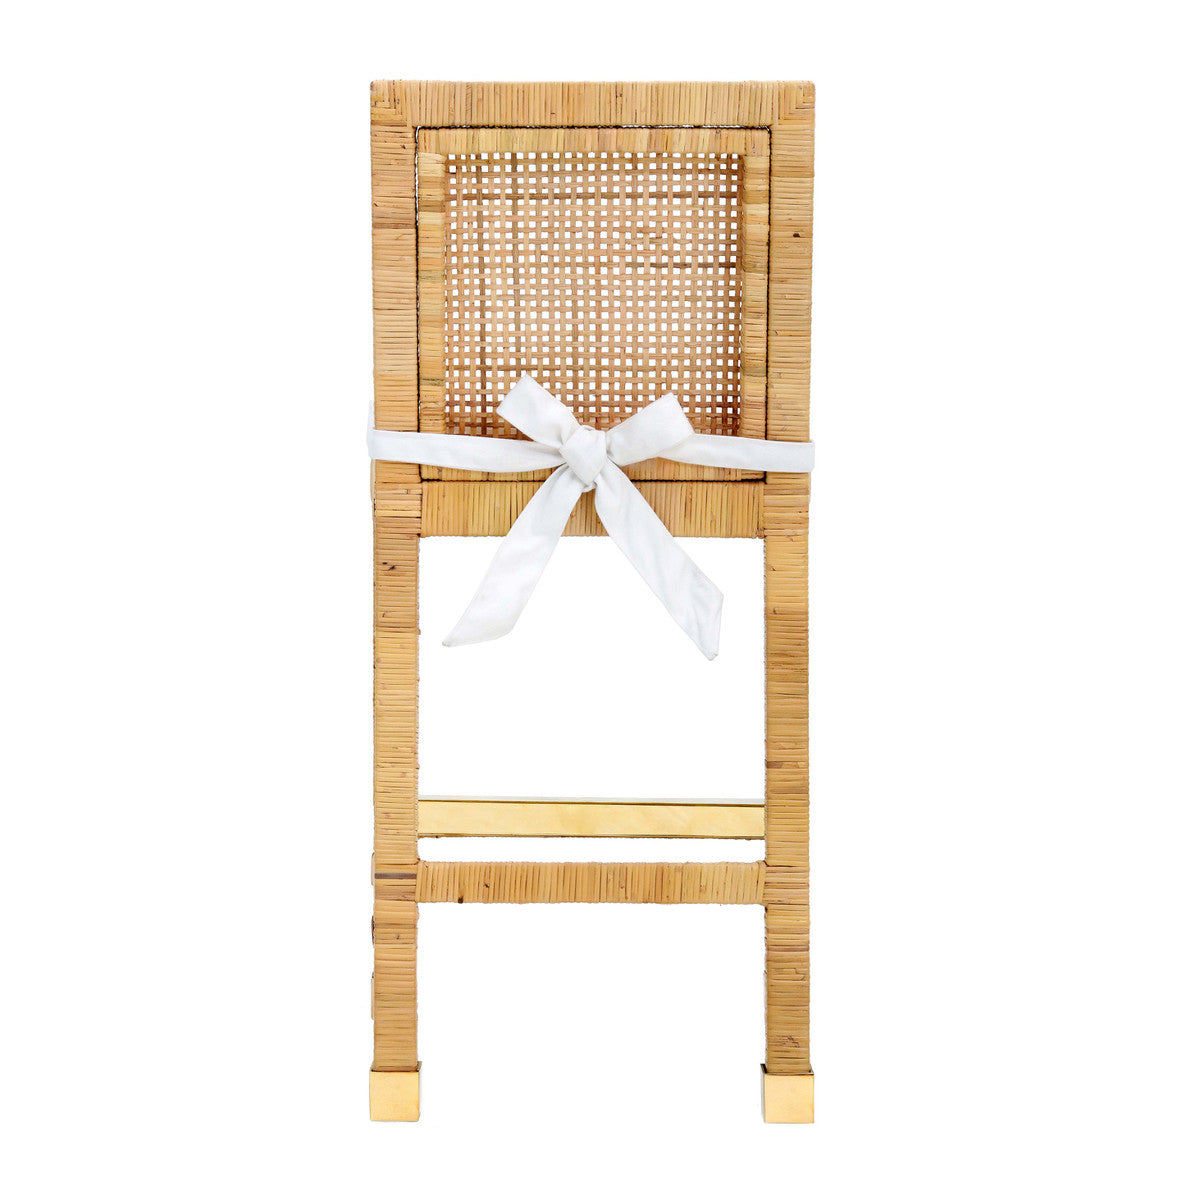 Arimo Rattan Counter Stool - Luxury Living Collection